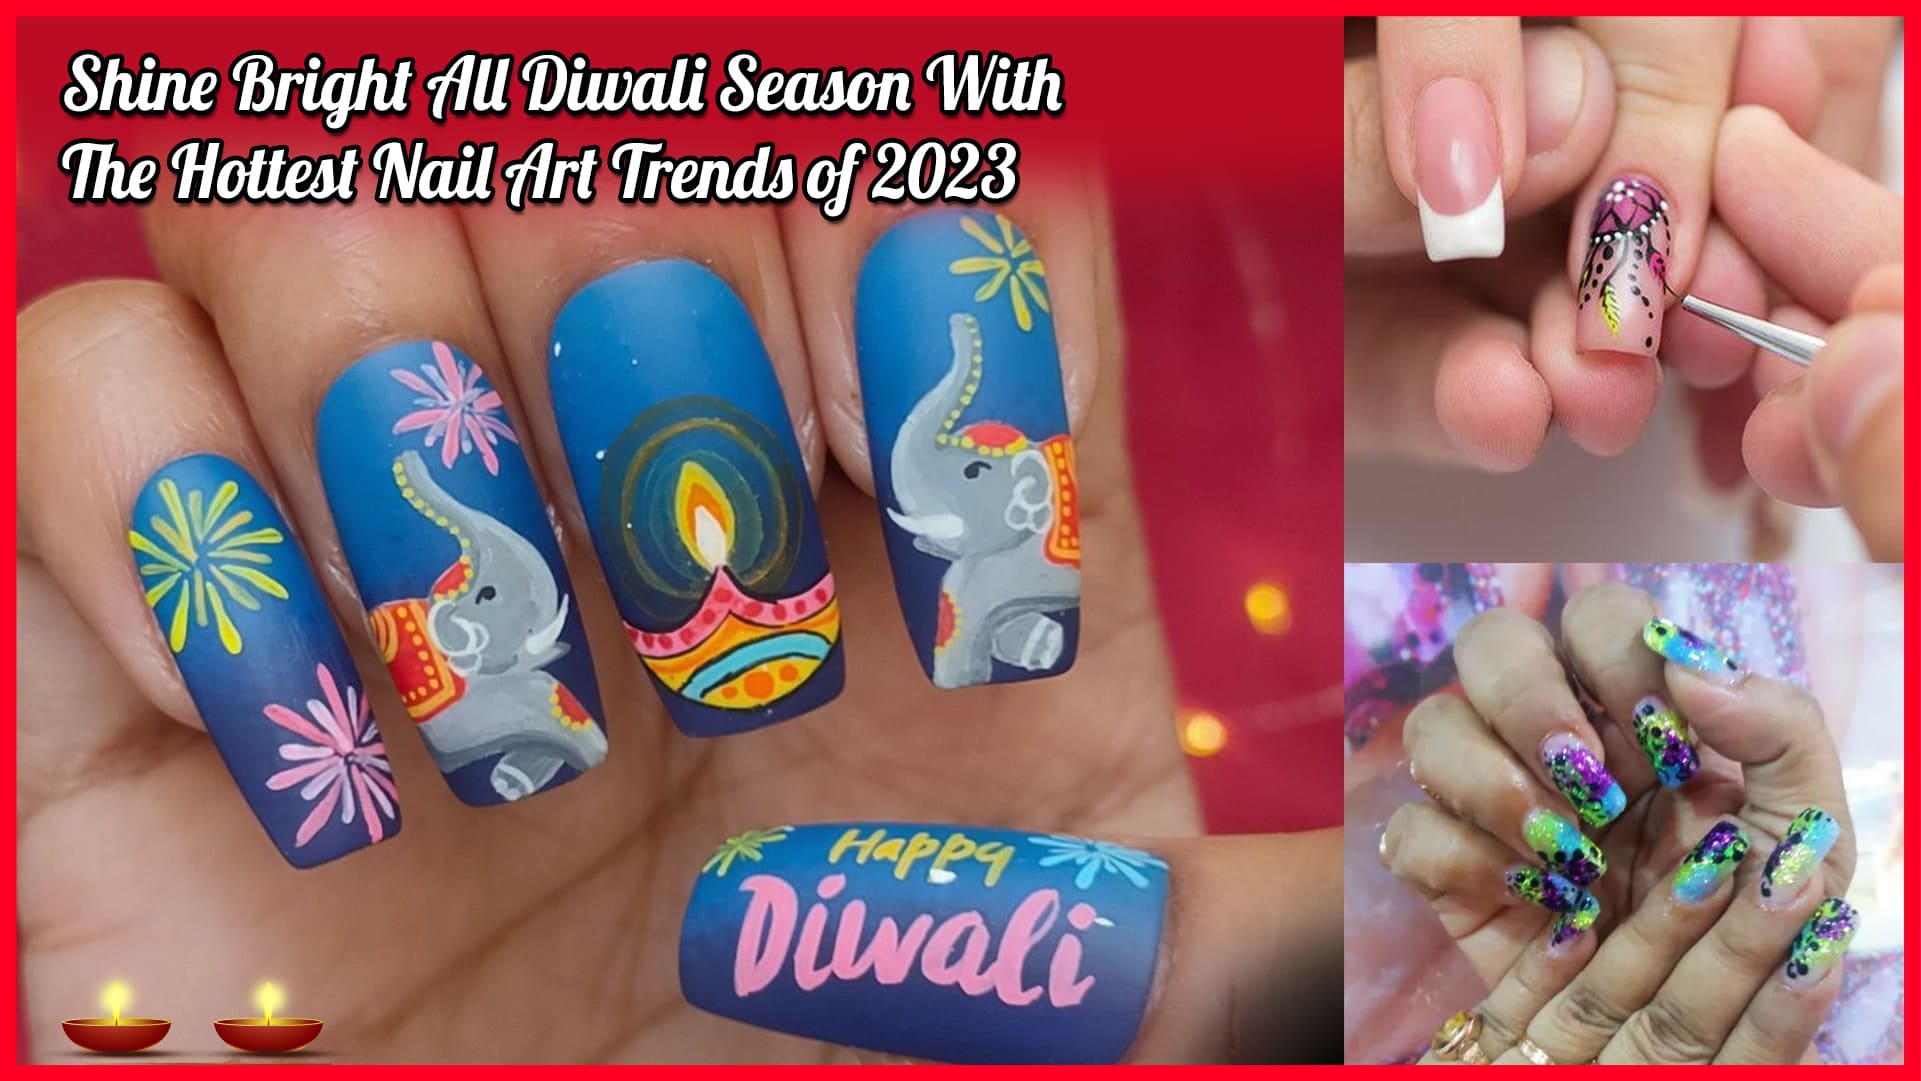 Shine bright all Diwali season with the hottest Nail Art Trends of 2023